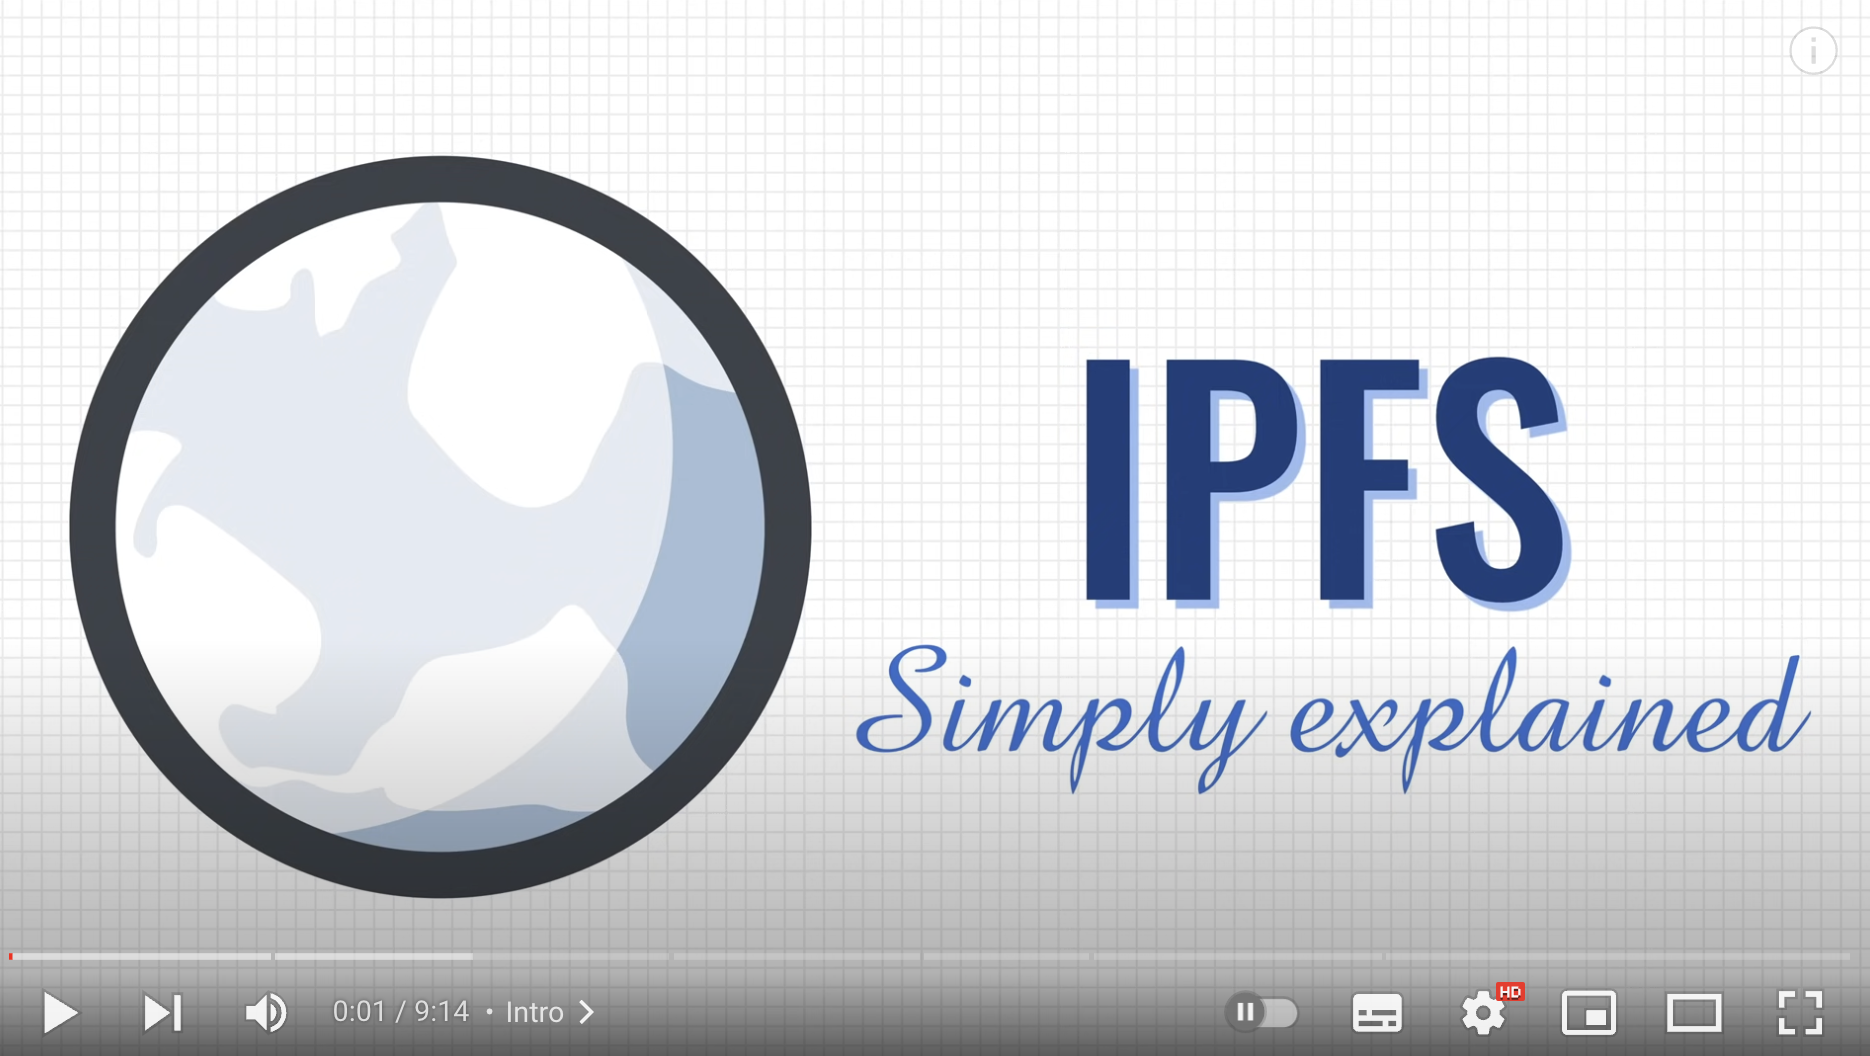 IPFS video explanation